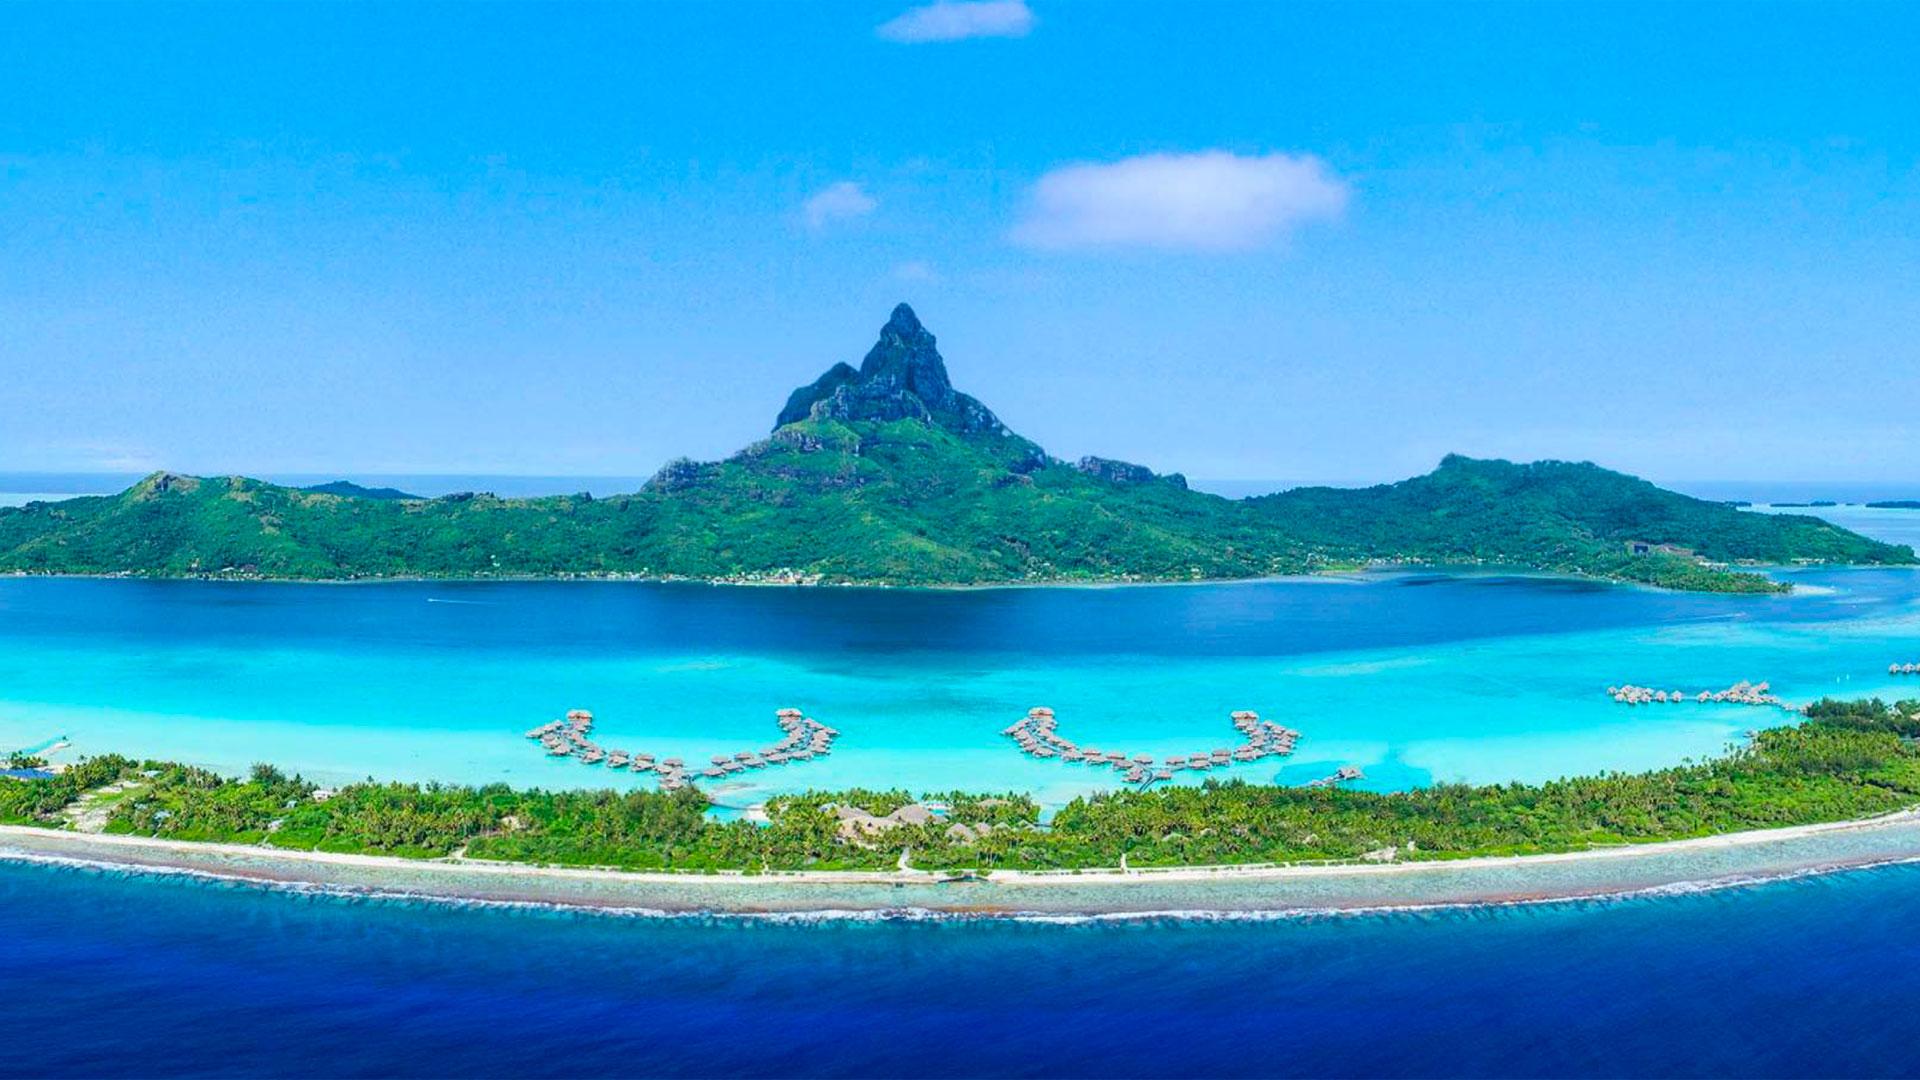 The archipelagos of French Polynesia, like Bora-Bora here, have very specific characteristics that need to be understood in order to preserve them.